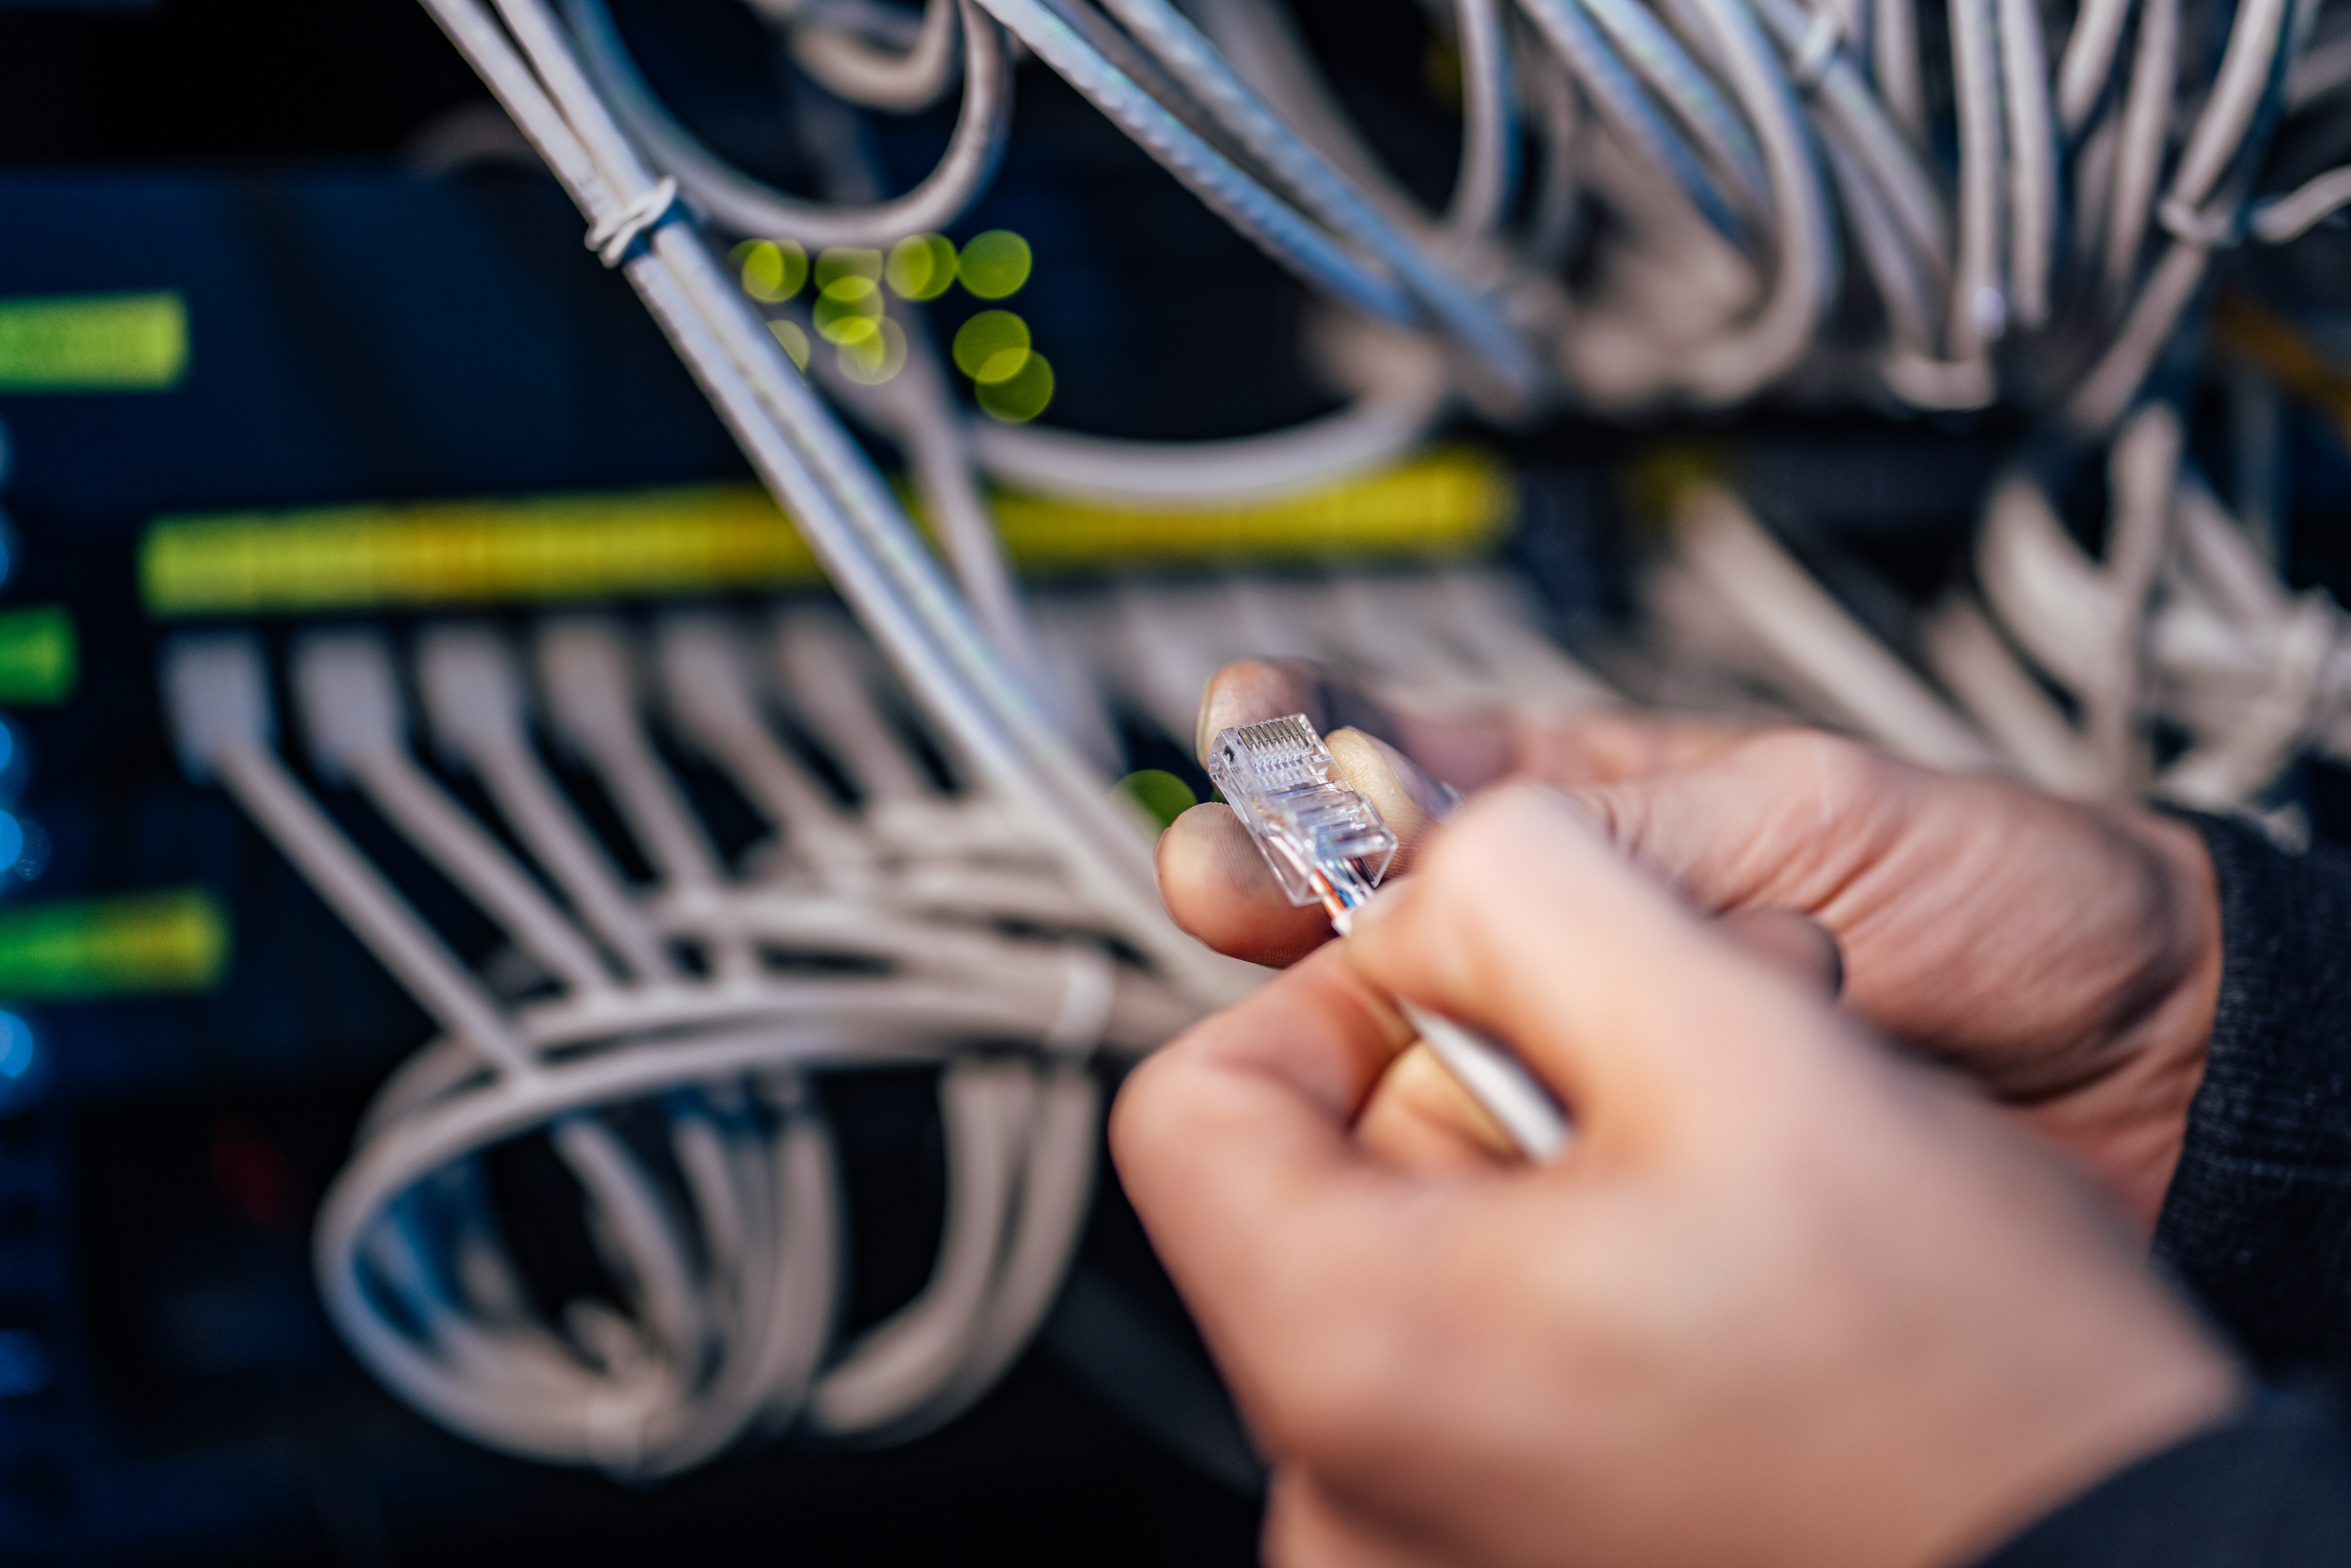 Maximize your network's potential with our guide to understanding network cabling. From Ethernet to fiber optics, discover the essential components for seamless connectivity. Learn how proper infrastructure ensures reliable data transmission and explore key factors like installation and maintenance for optimal performance.